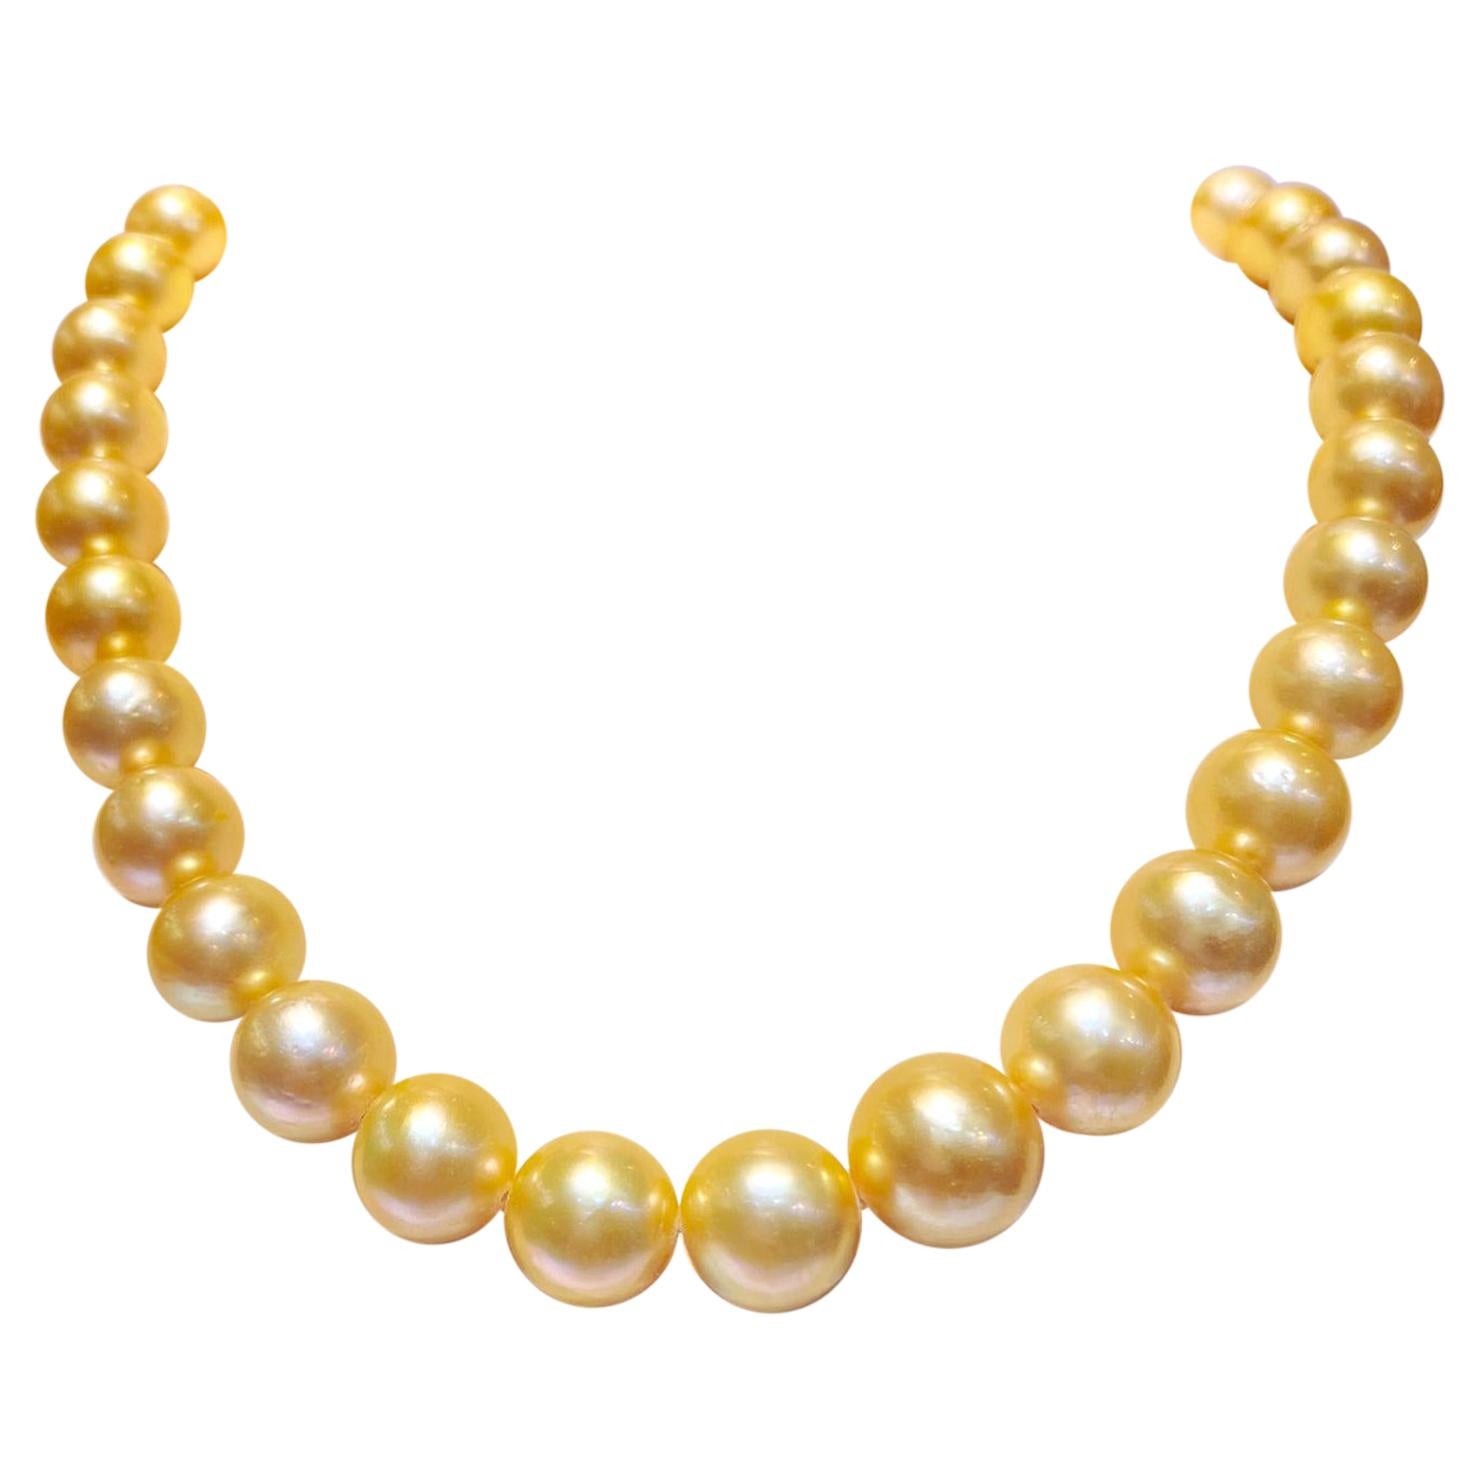 Round Golden South Sea Pearl 37pcs Will Be More When Strung For Sale at ...